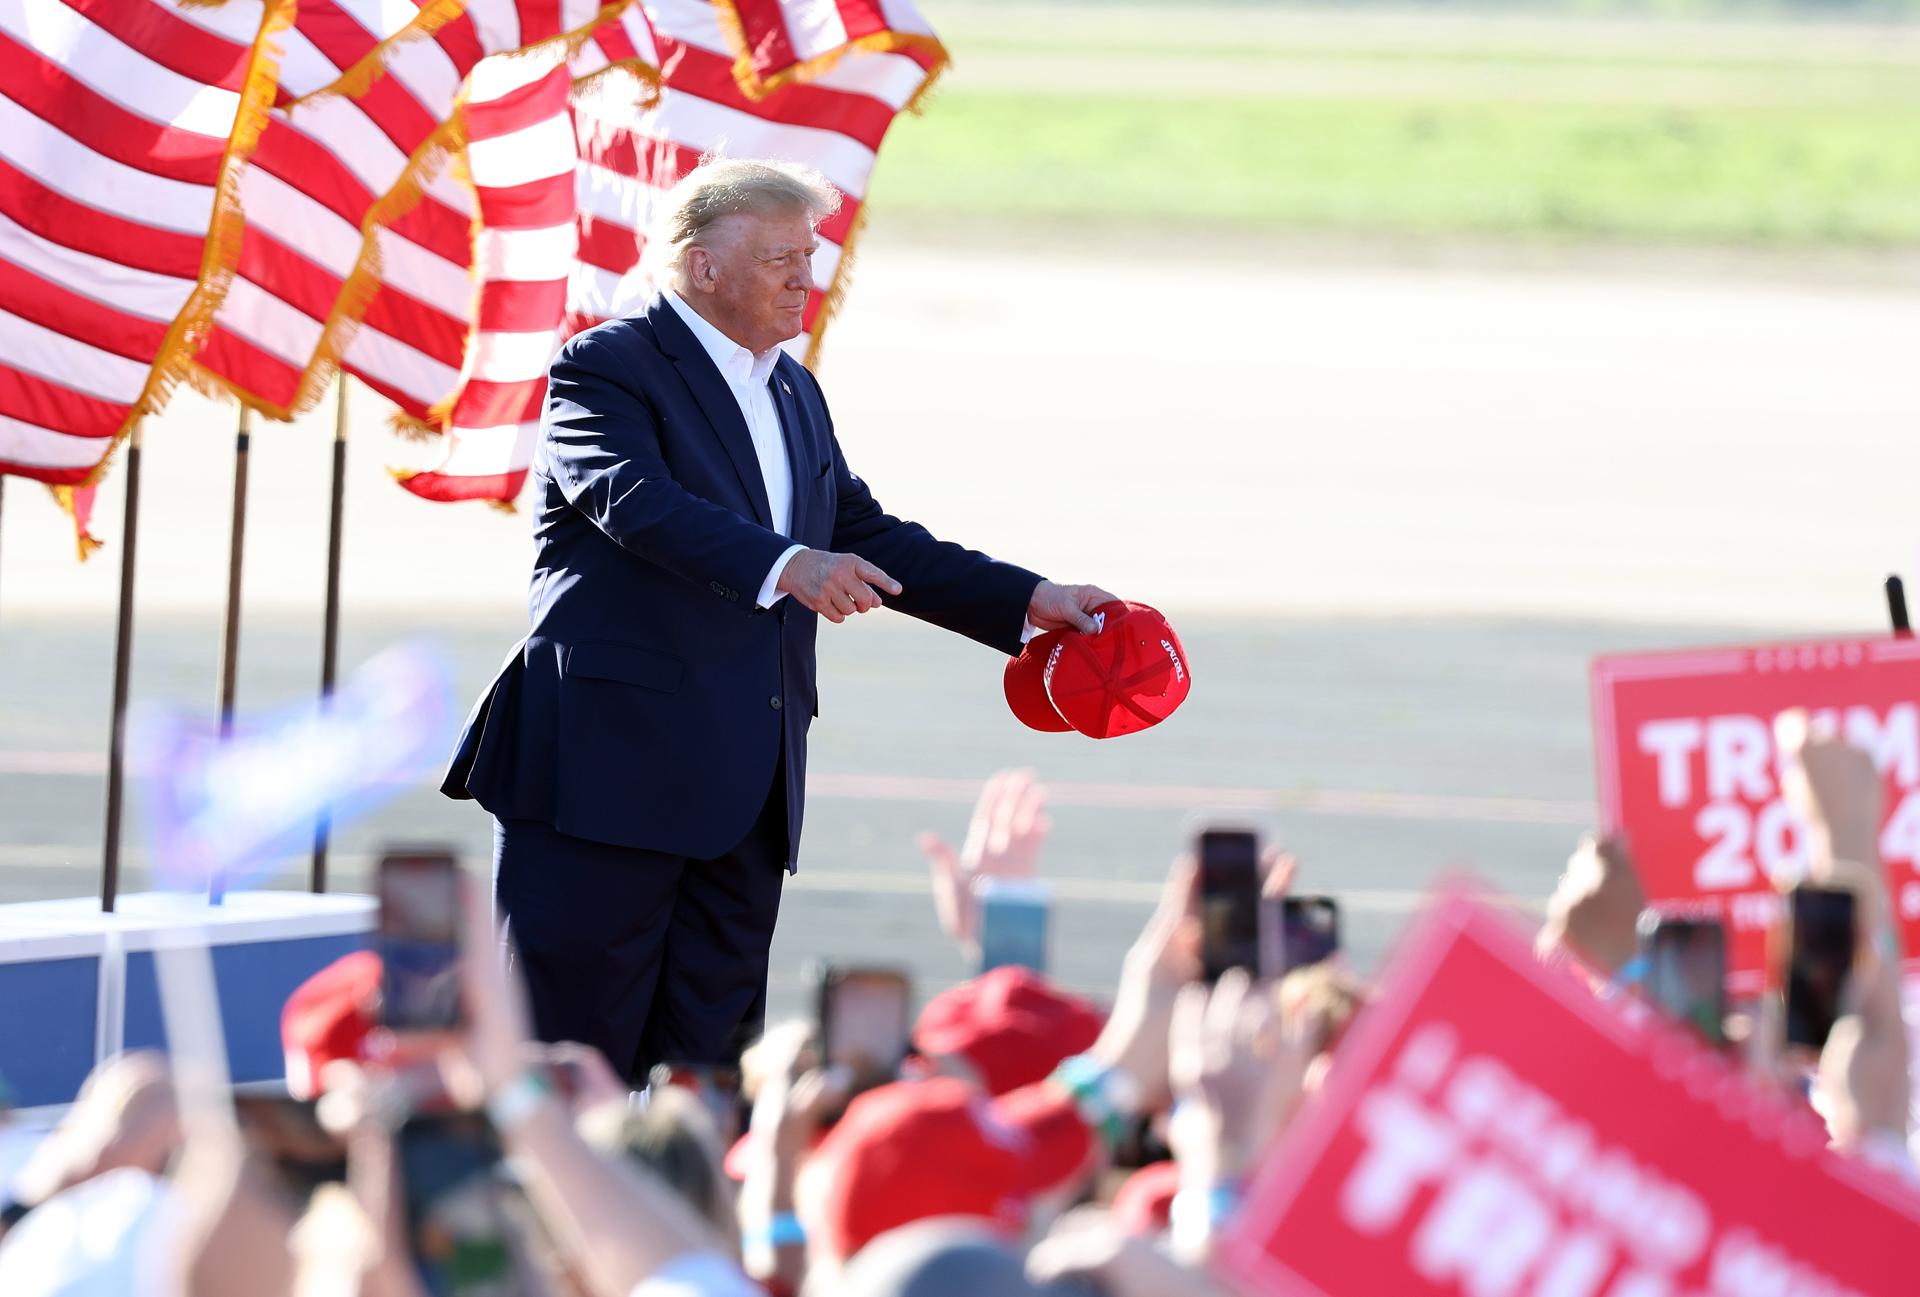 Former US President Donald Trump points to the crowd during his Make America Great Again Rally at the Waco Regional Airport Center in Waco, Texas, USA, 25 March 2023. EFE/EPA/ADAM DAVIS